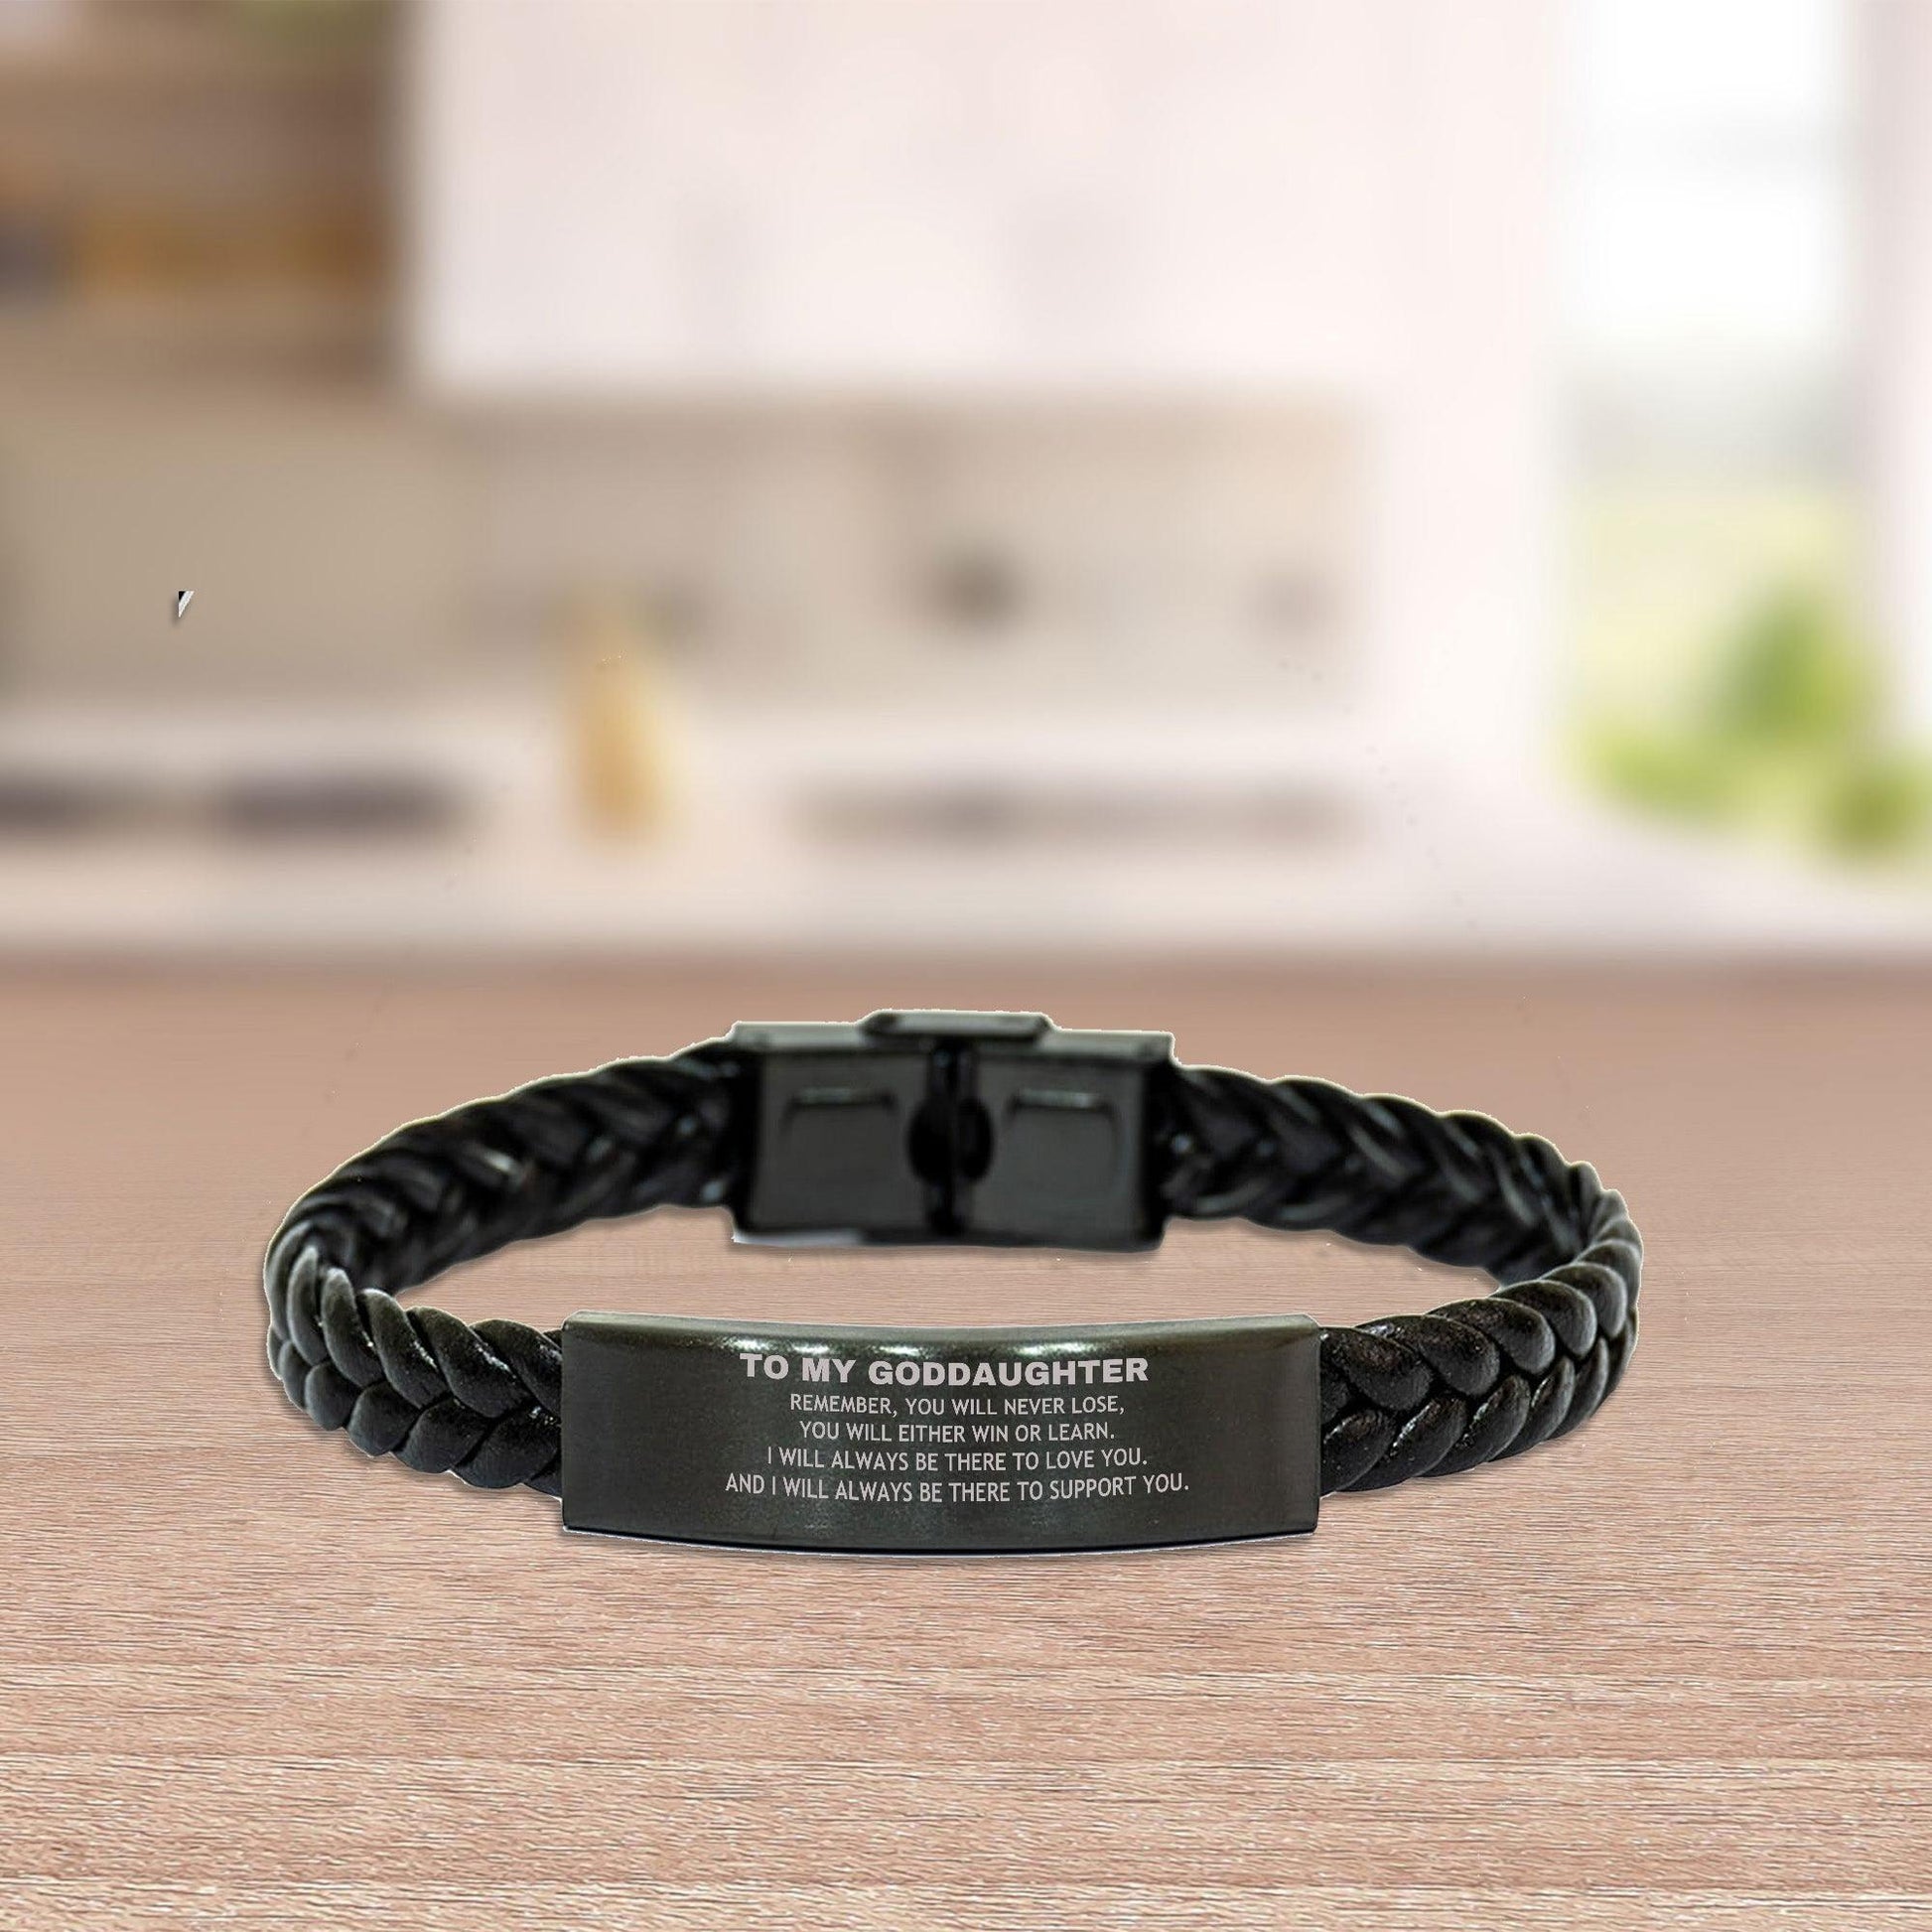 Goddaughter Gifts, To My Goddaughter Remember, you will never lose. You will either WIN or LEARN, Keepsake Braided Leather Bracelet For Goddaughter Engraved, Birthday Christmas Gifts Ideas For Goddaughter X-mas Gifts - Mallard Moon Gift Shop